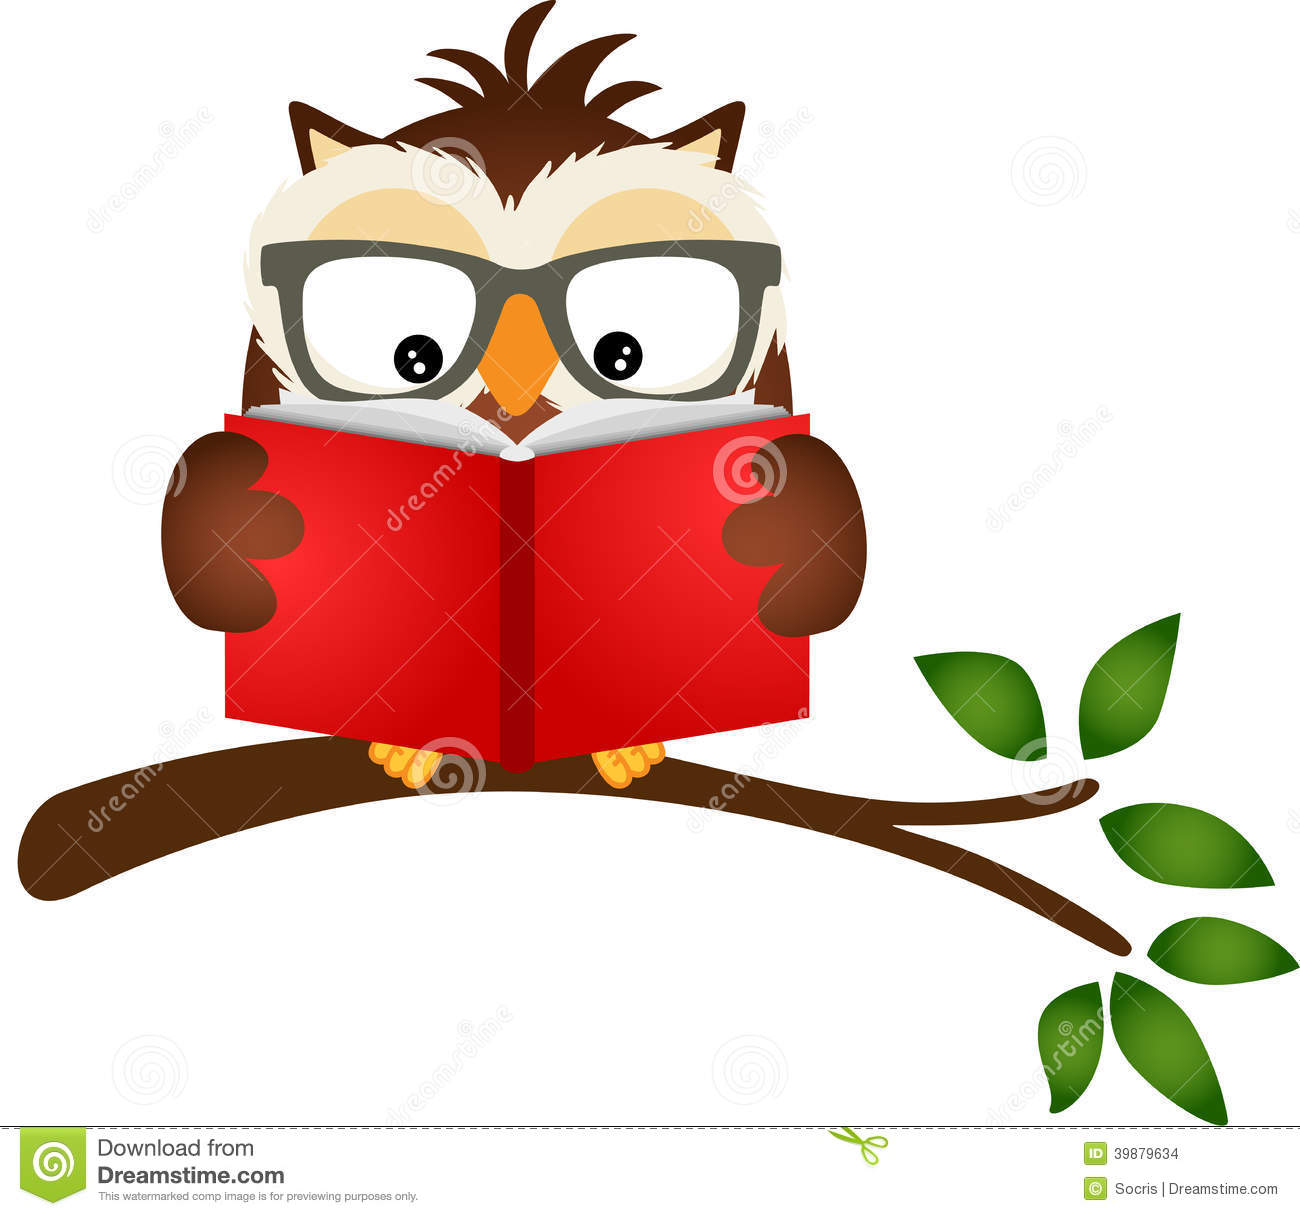 Representing A Owl Reading A Book On Tree Branch Isolated On White